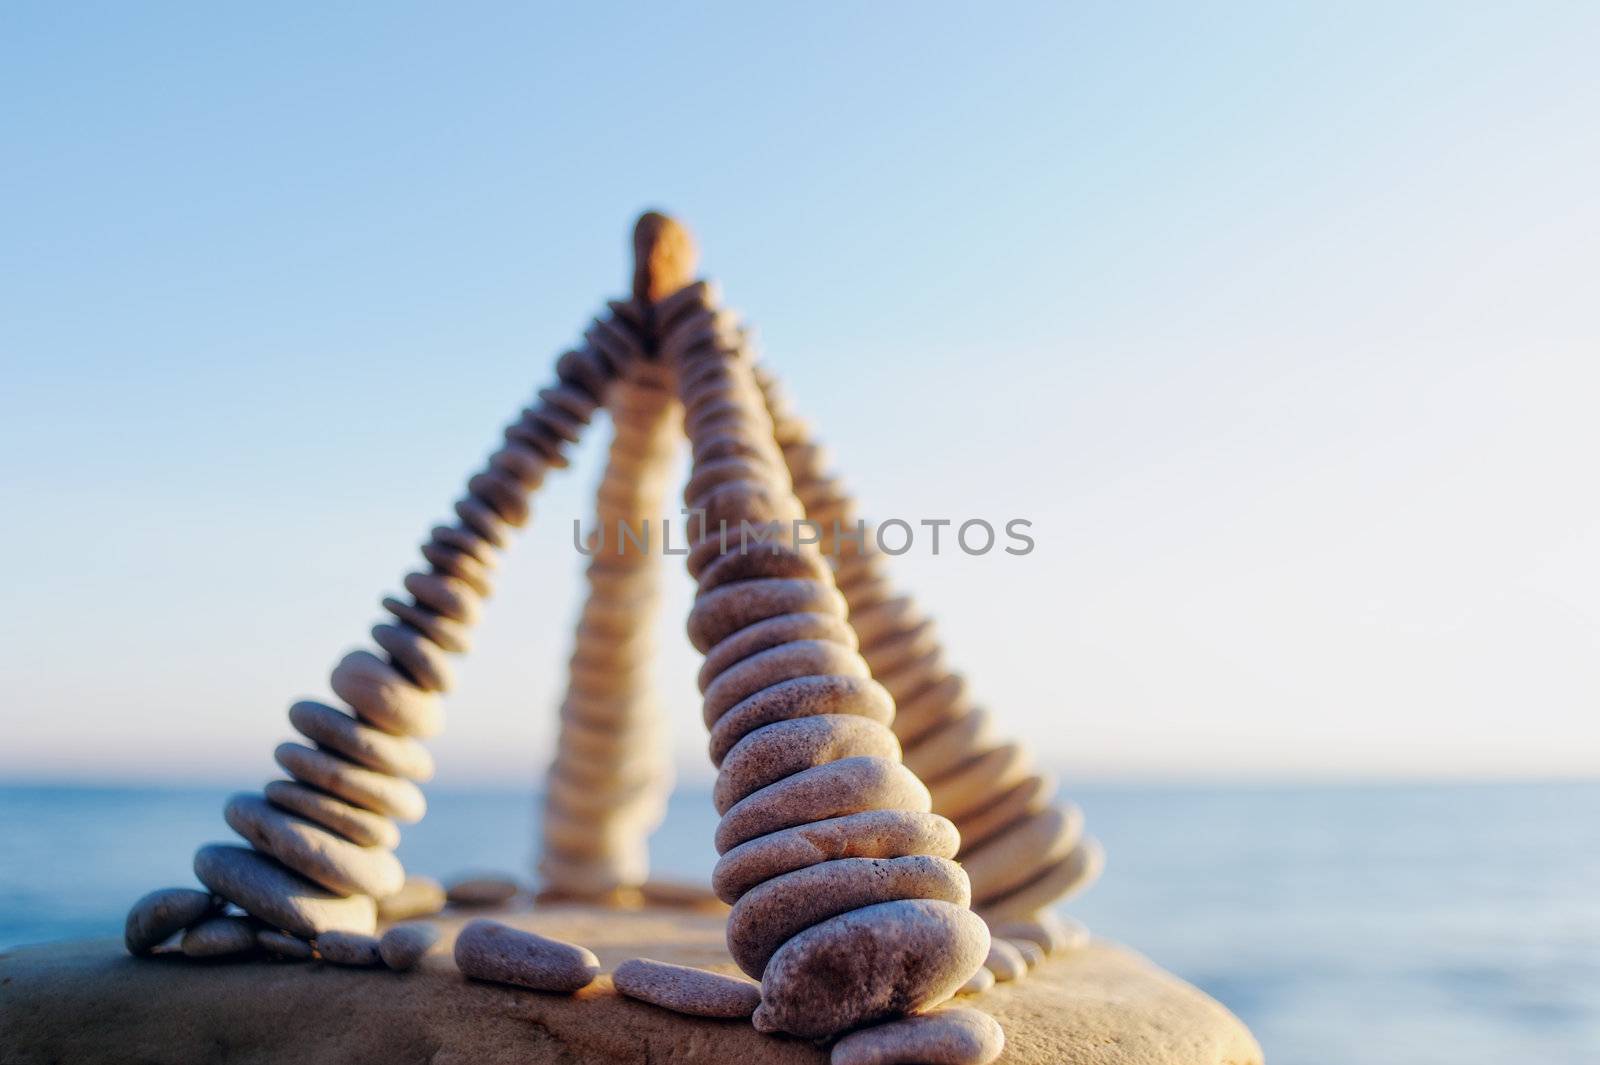 Pyramidal group of small pebbles in the balance on the seacoast